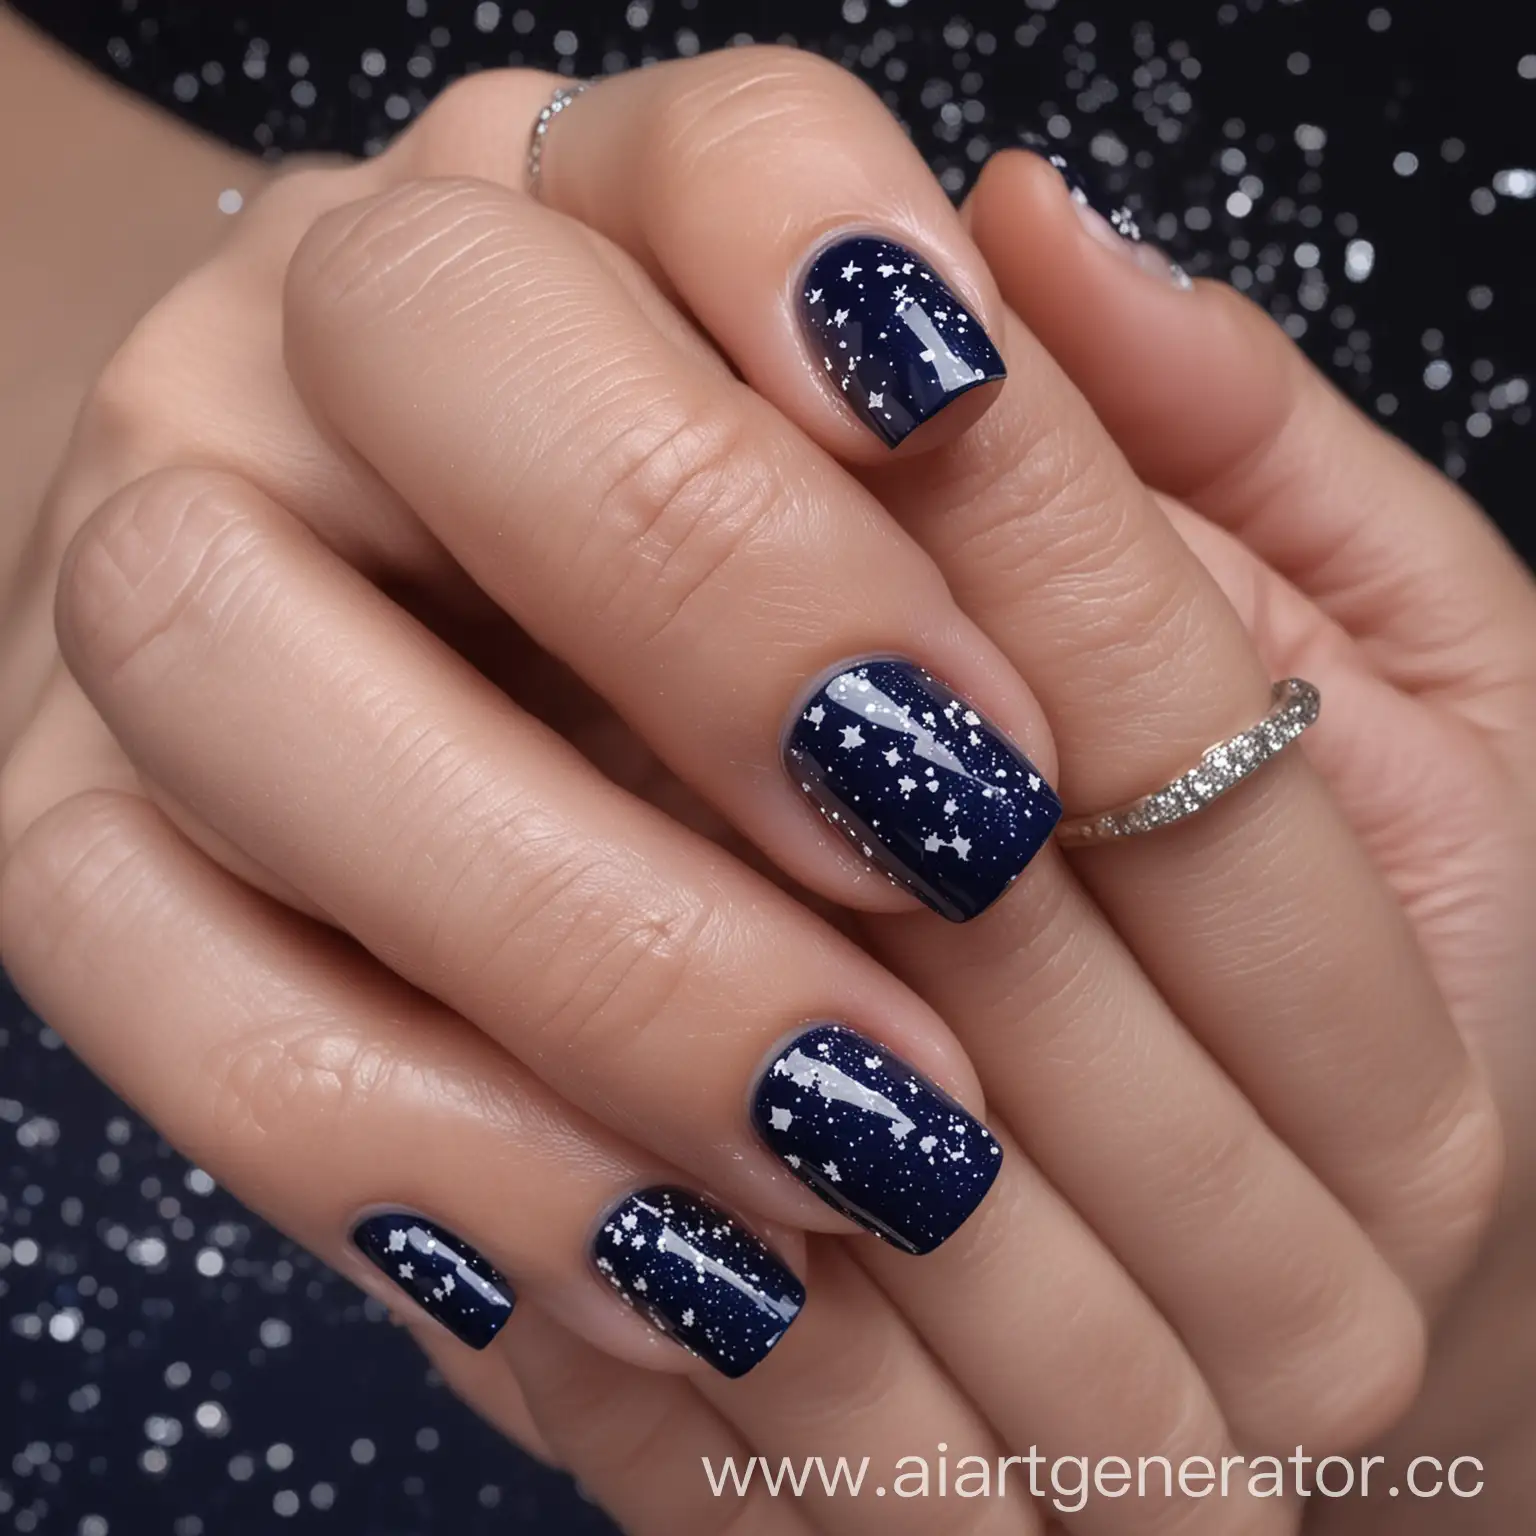 Medium-length nails, painted with dark blue nail polish with small sparkles and white patterns resembling constellations